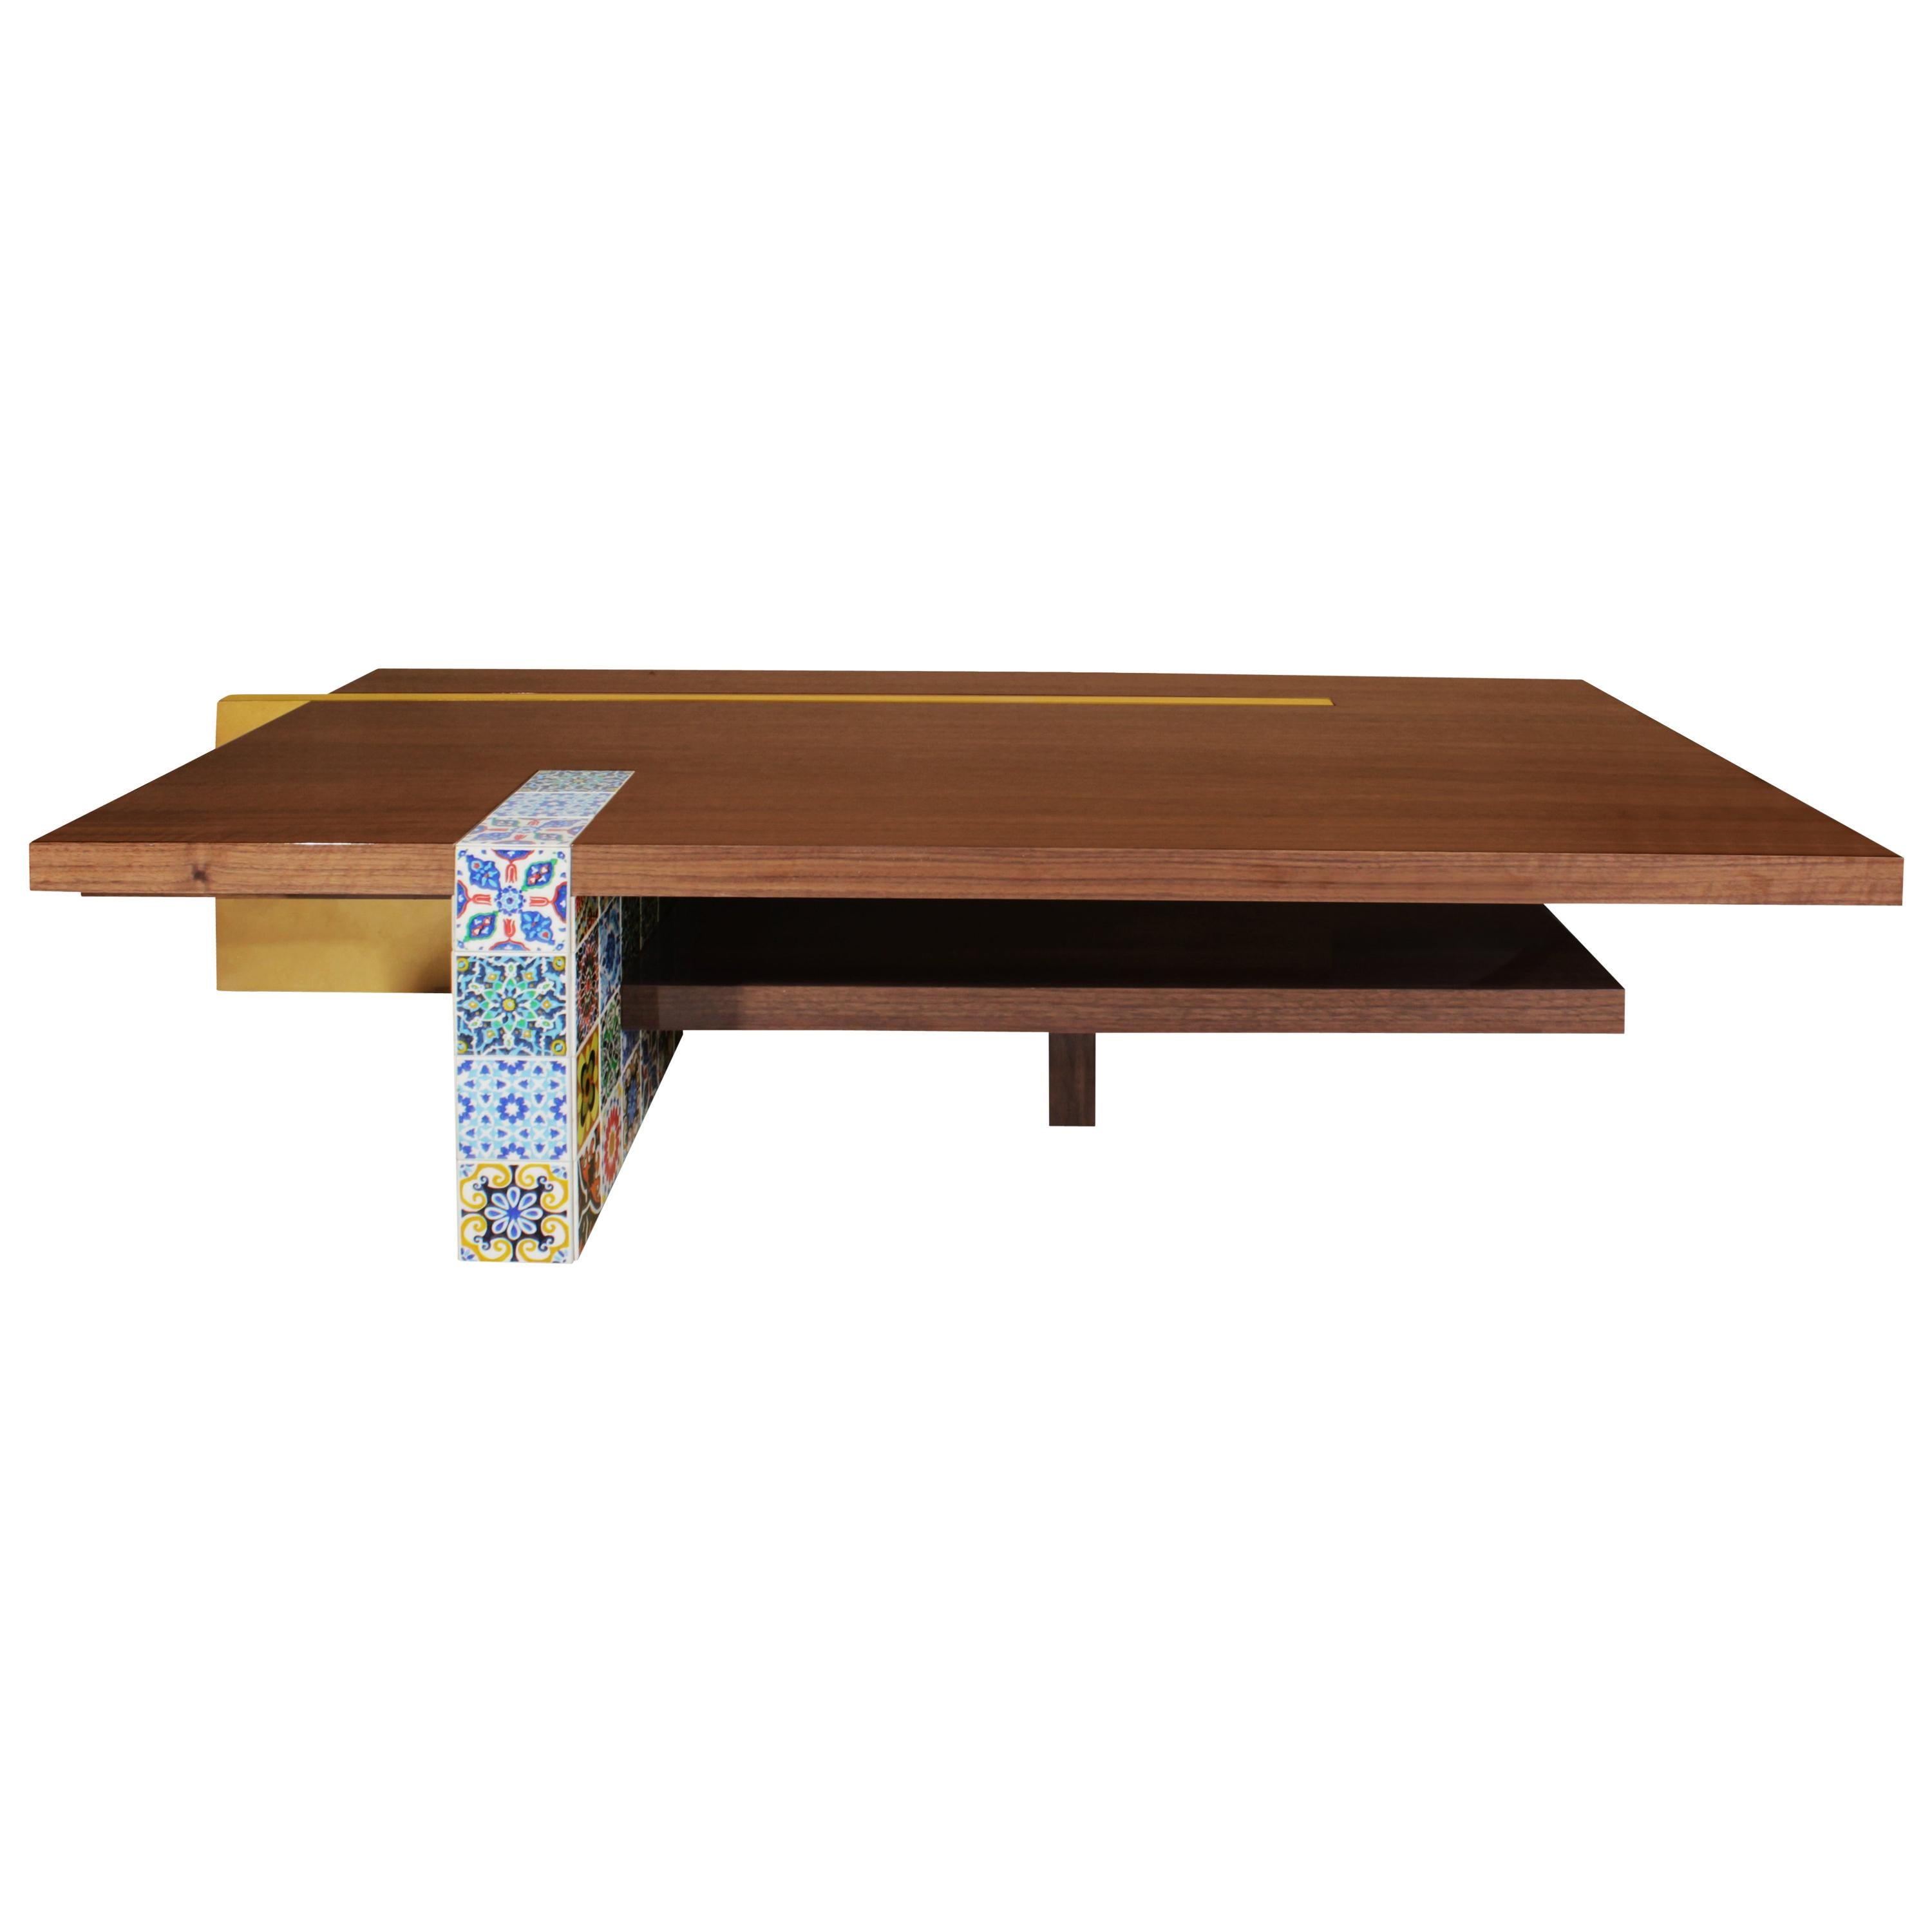 21st Century Camelia Center Table Walnut Wood Layers Hand Painted Tiles